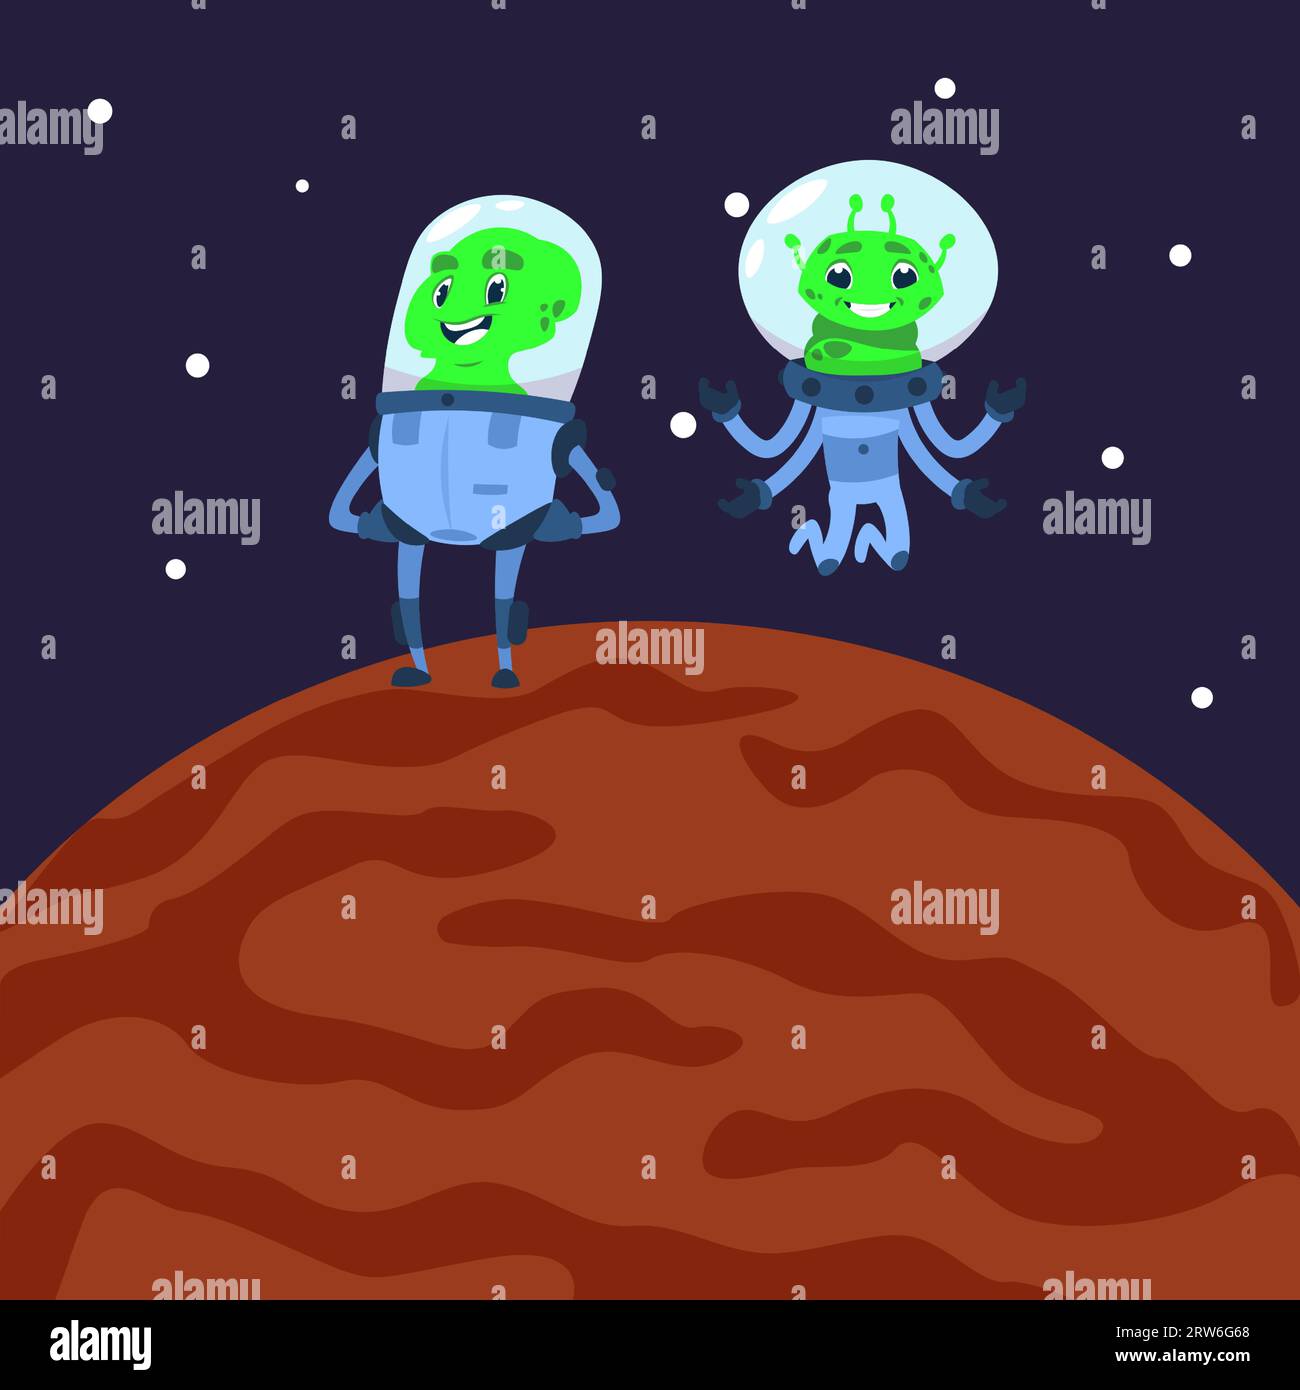 Alien on planet. Cosmonauts on planet. Cute friendly monster astronauts in spacesuit. Childish print or poster, space adventures. Explore universe car Stock Vector